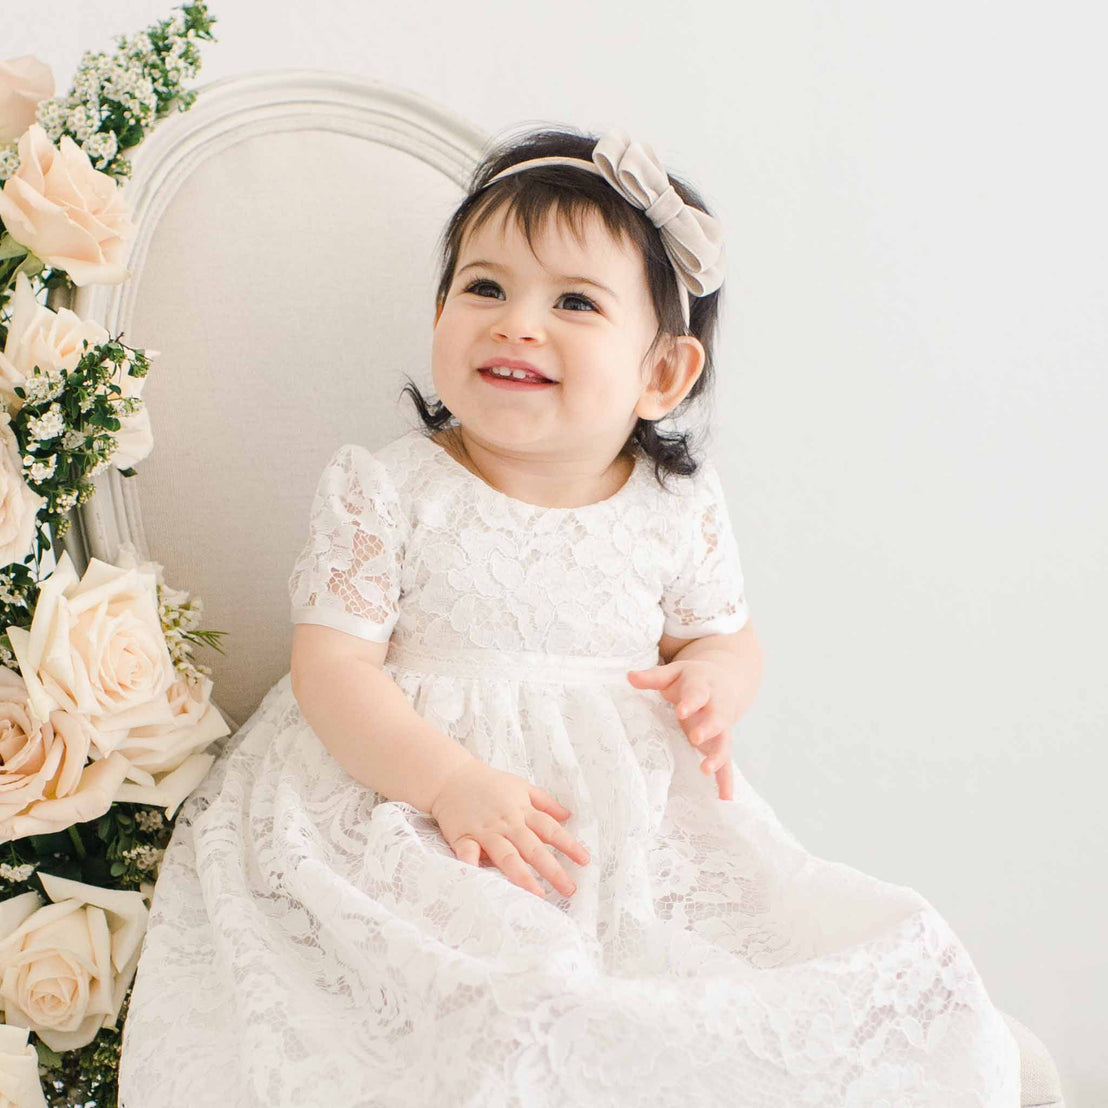 A cheerful toddler with dark hair, wearing a Rose Christening Gown & Bonnet, sits next to a chair adorned with cream roses, smiling joyfully in a light-colored room.